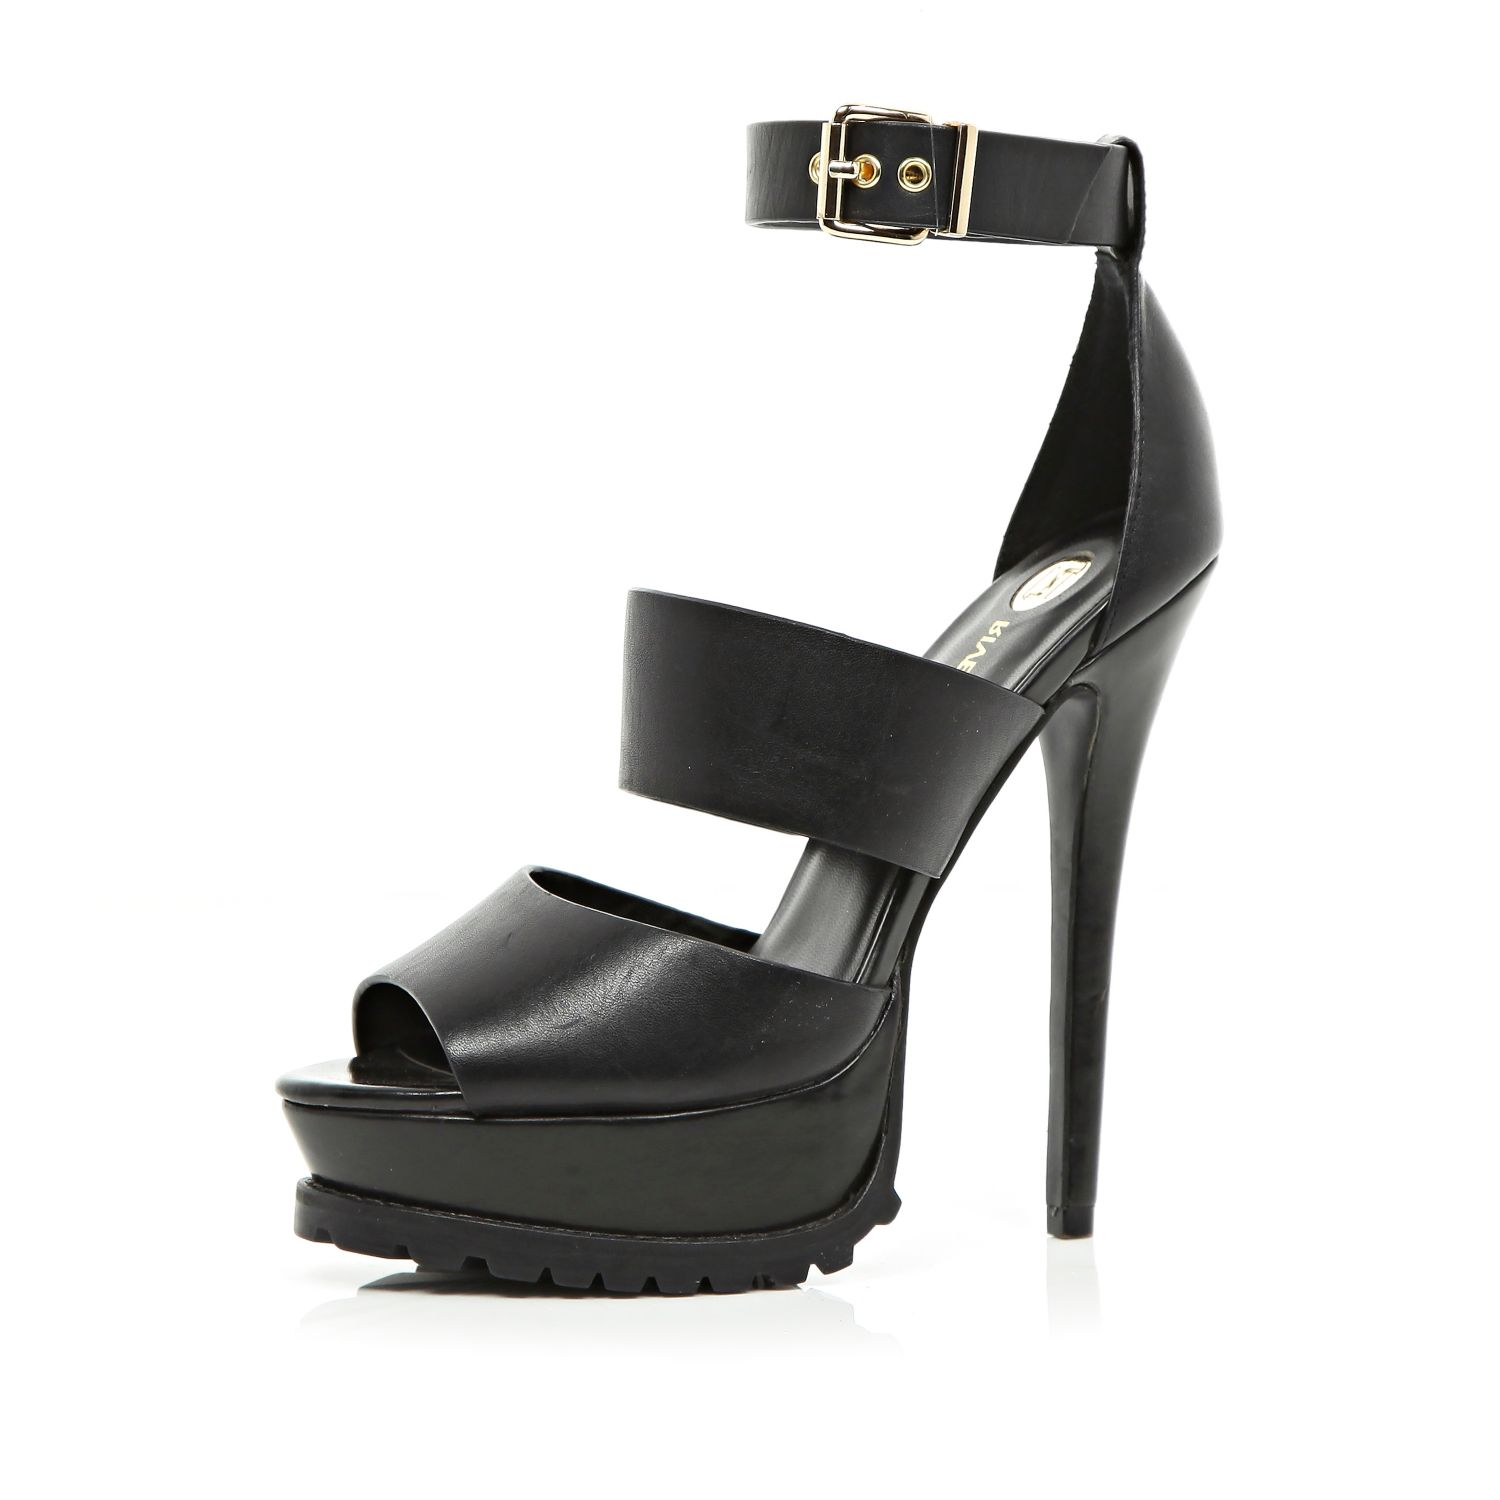 River Island Black Cleated Sole Platform Sandals in Black | Lyst